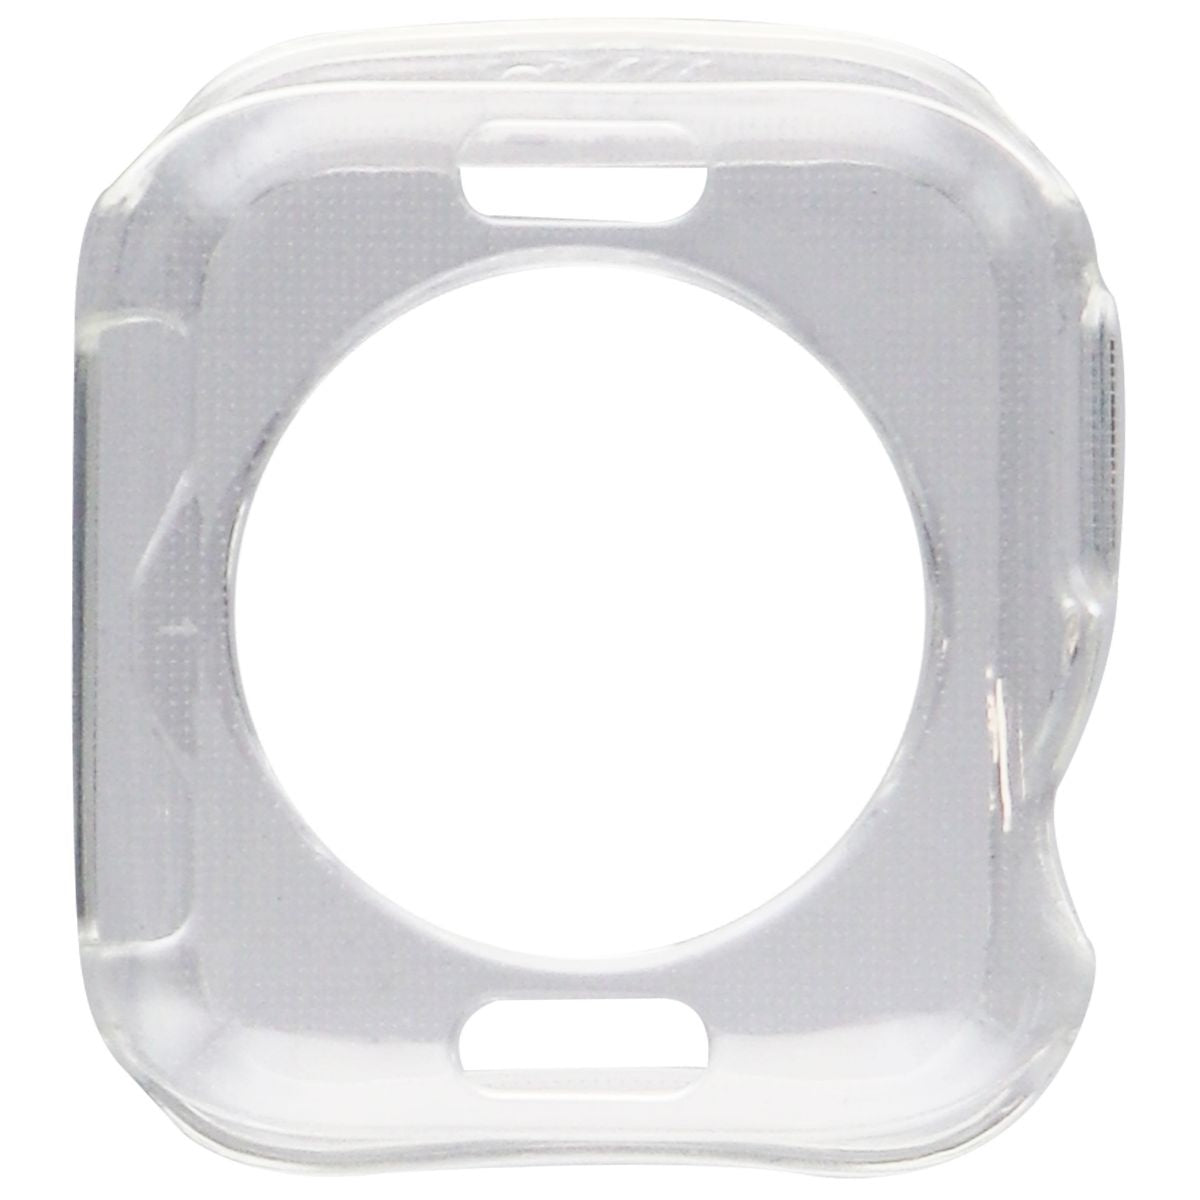 Case-Mate Tough Watch Bumper for 38-40mm Apple Watch Series 1, 2, 3, 4 - Clear